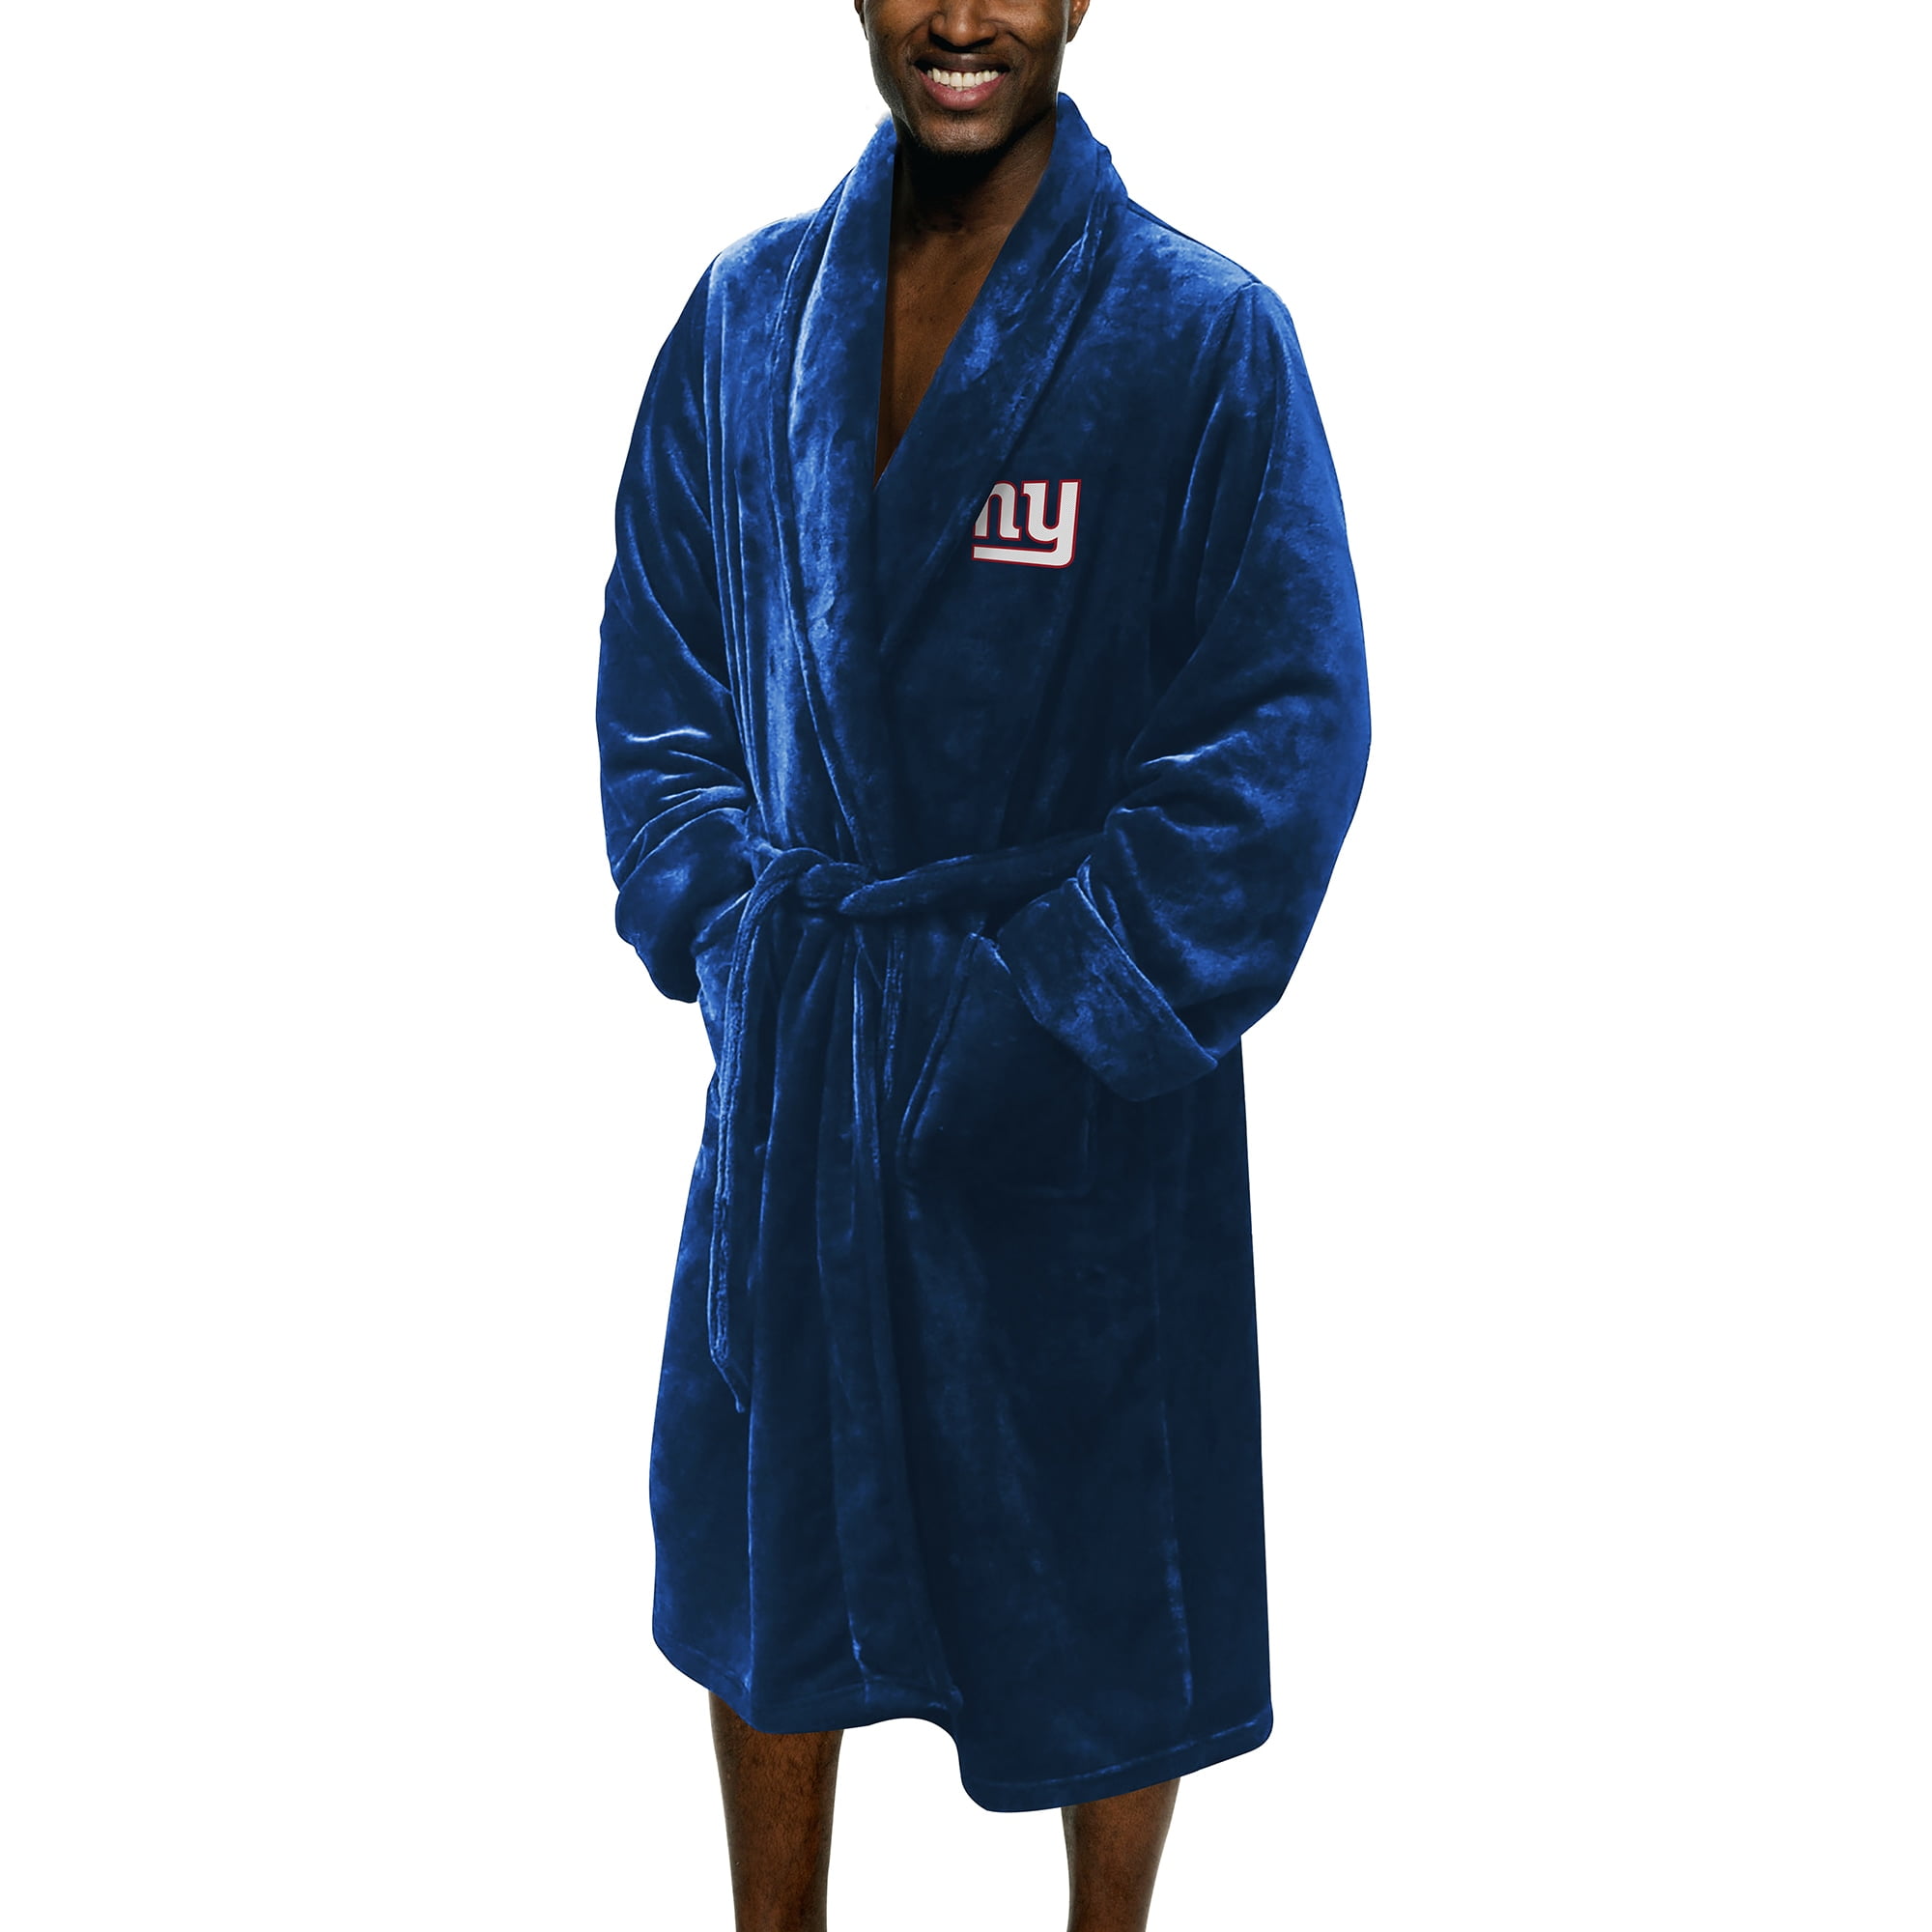 NFL New York Giants 26 x 47 Large Extra Large Silk Touch Men s Bath Robe b6880be4 83b4 469c 9a83 3ce7ae675bf5.685ee8b1233fdbe100a7ed146892acde